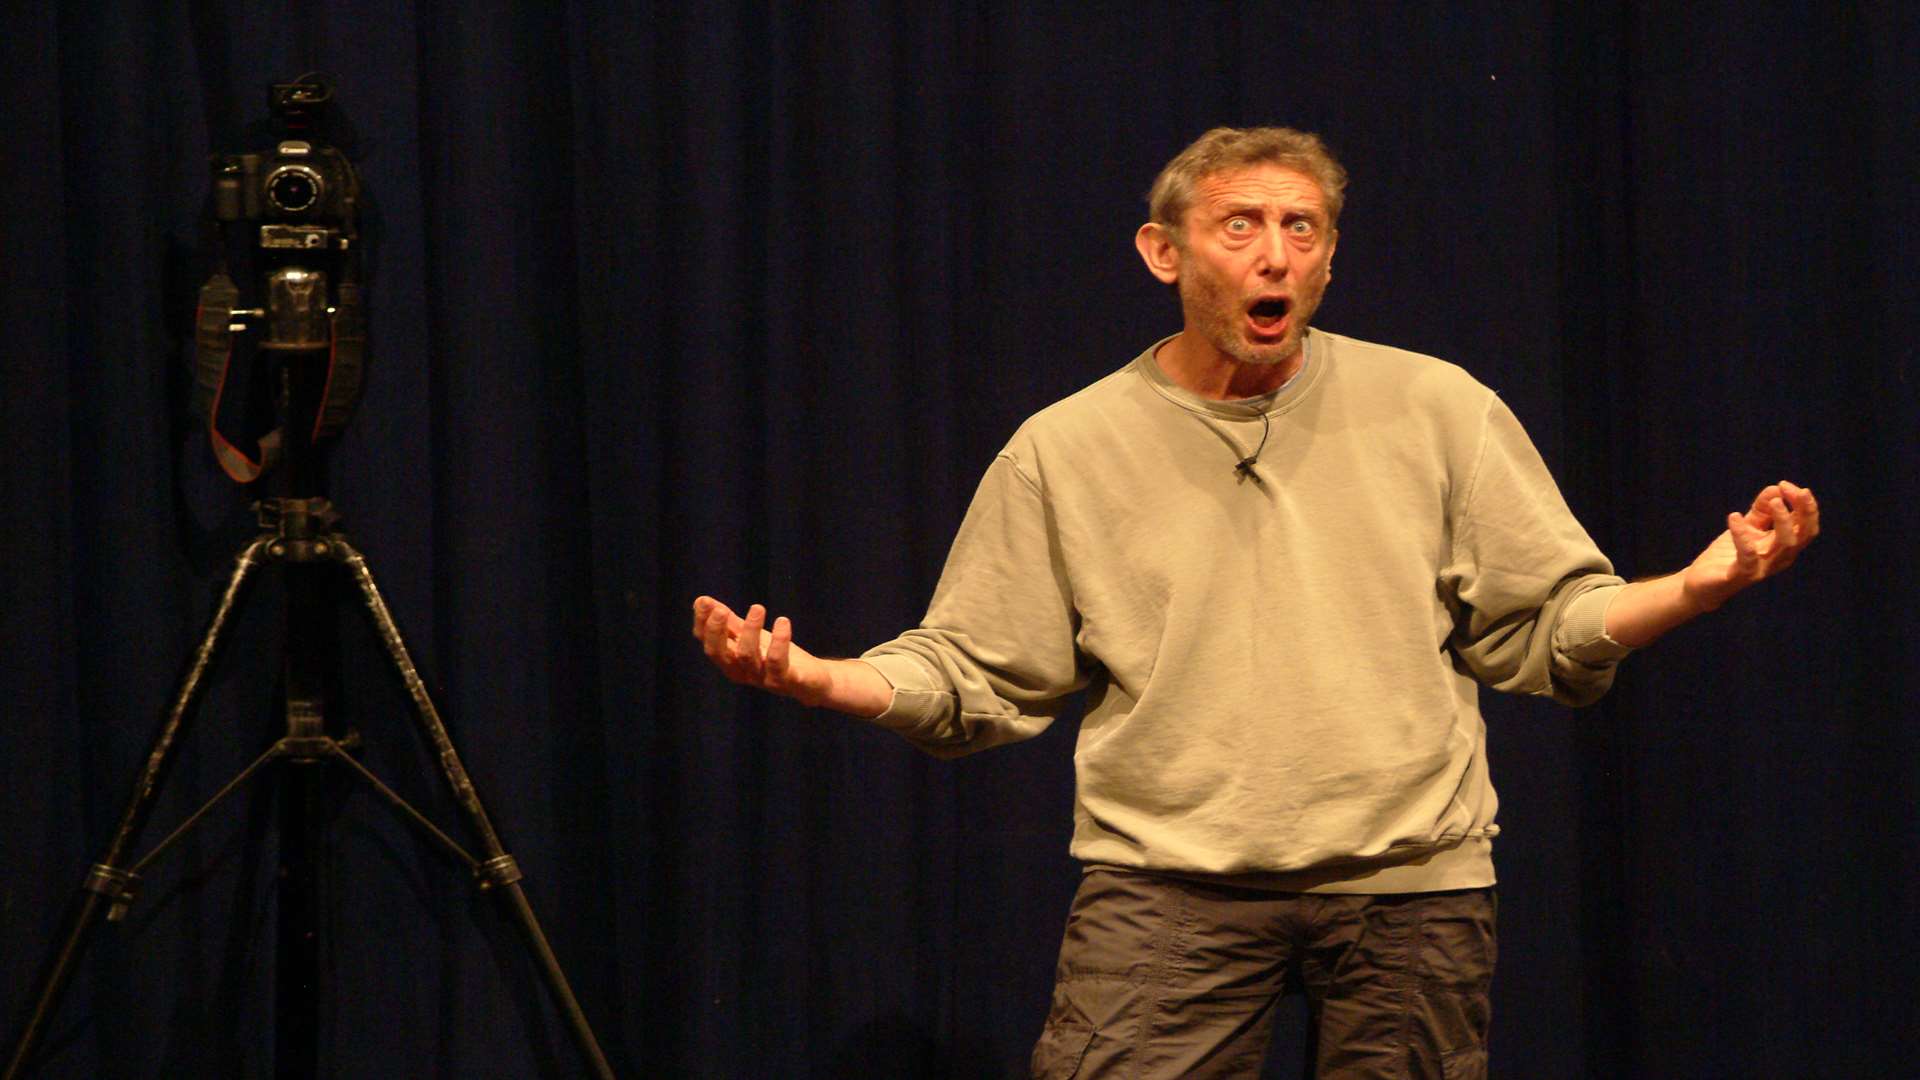 Michael Rosen gets animated in a children's poetry workshop